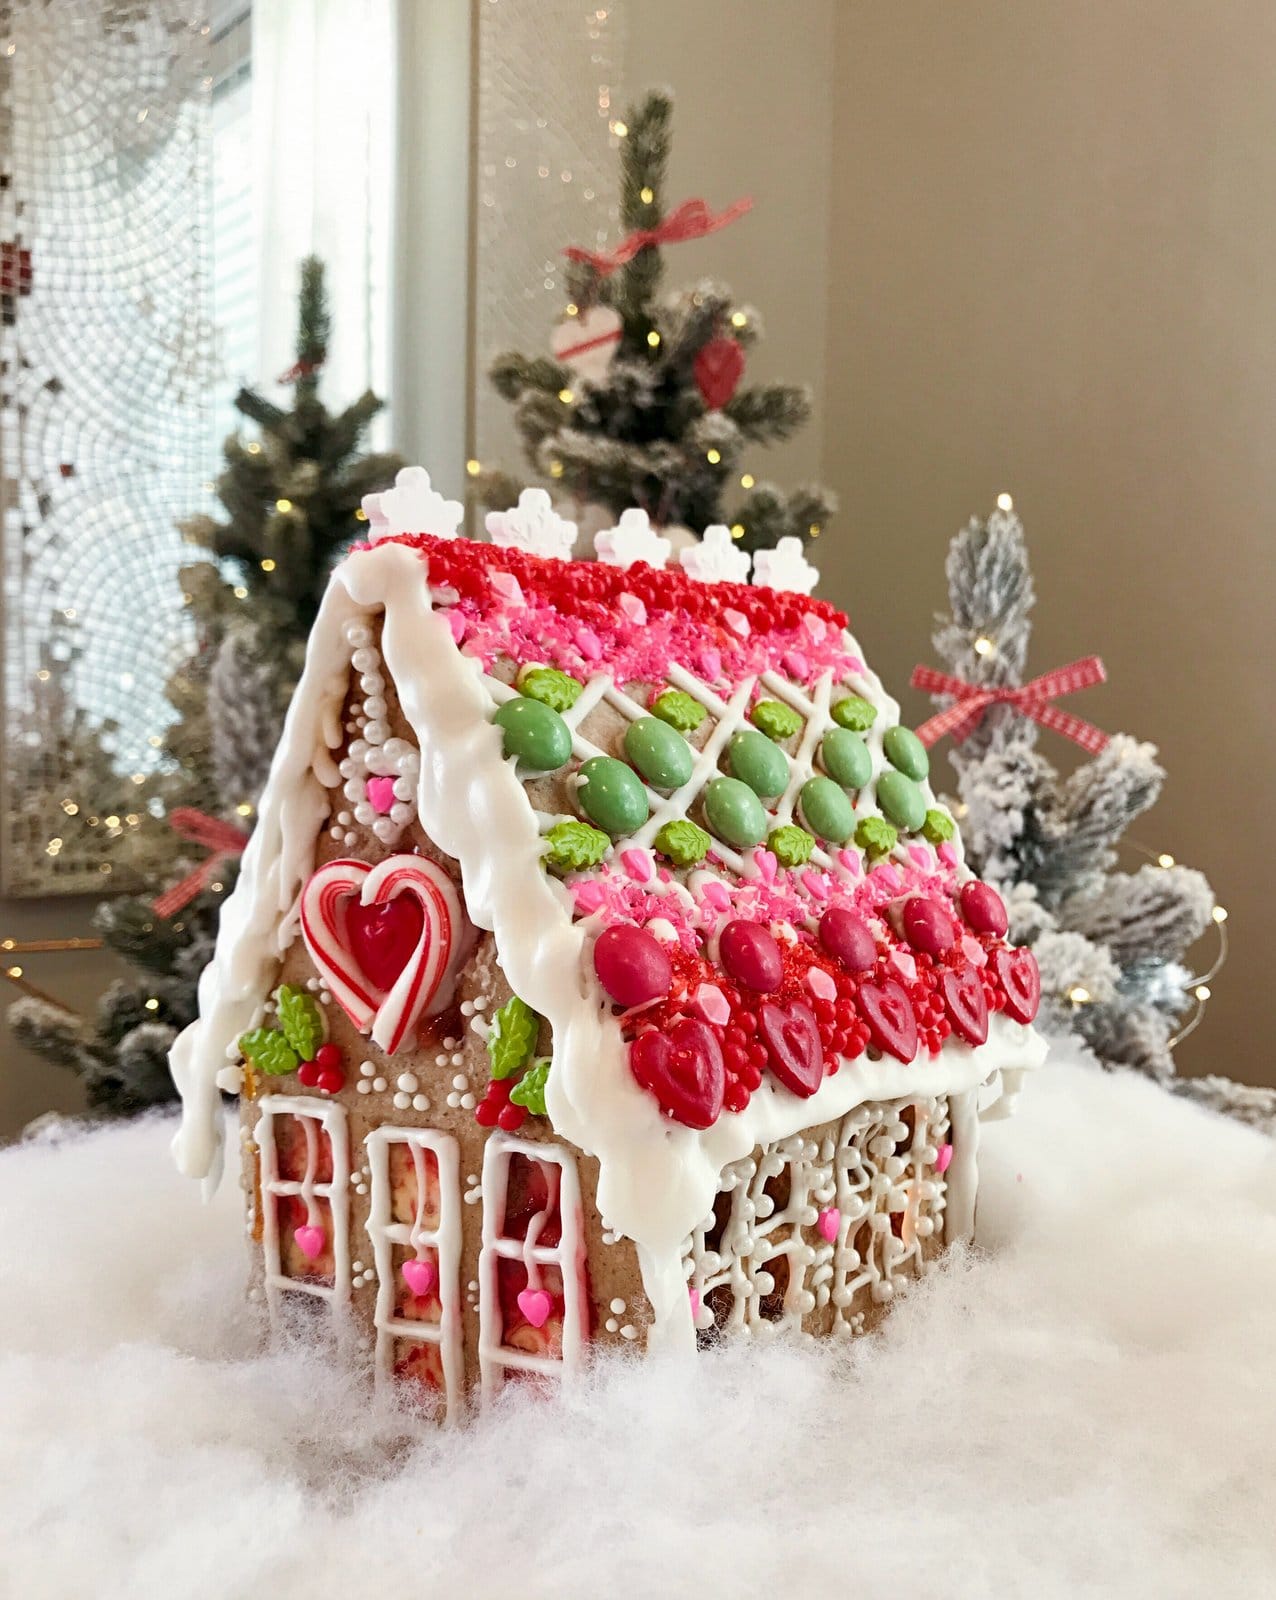 Pretty decorated gingerbread house